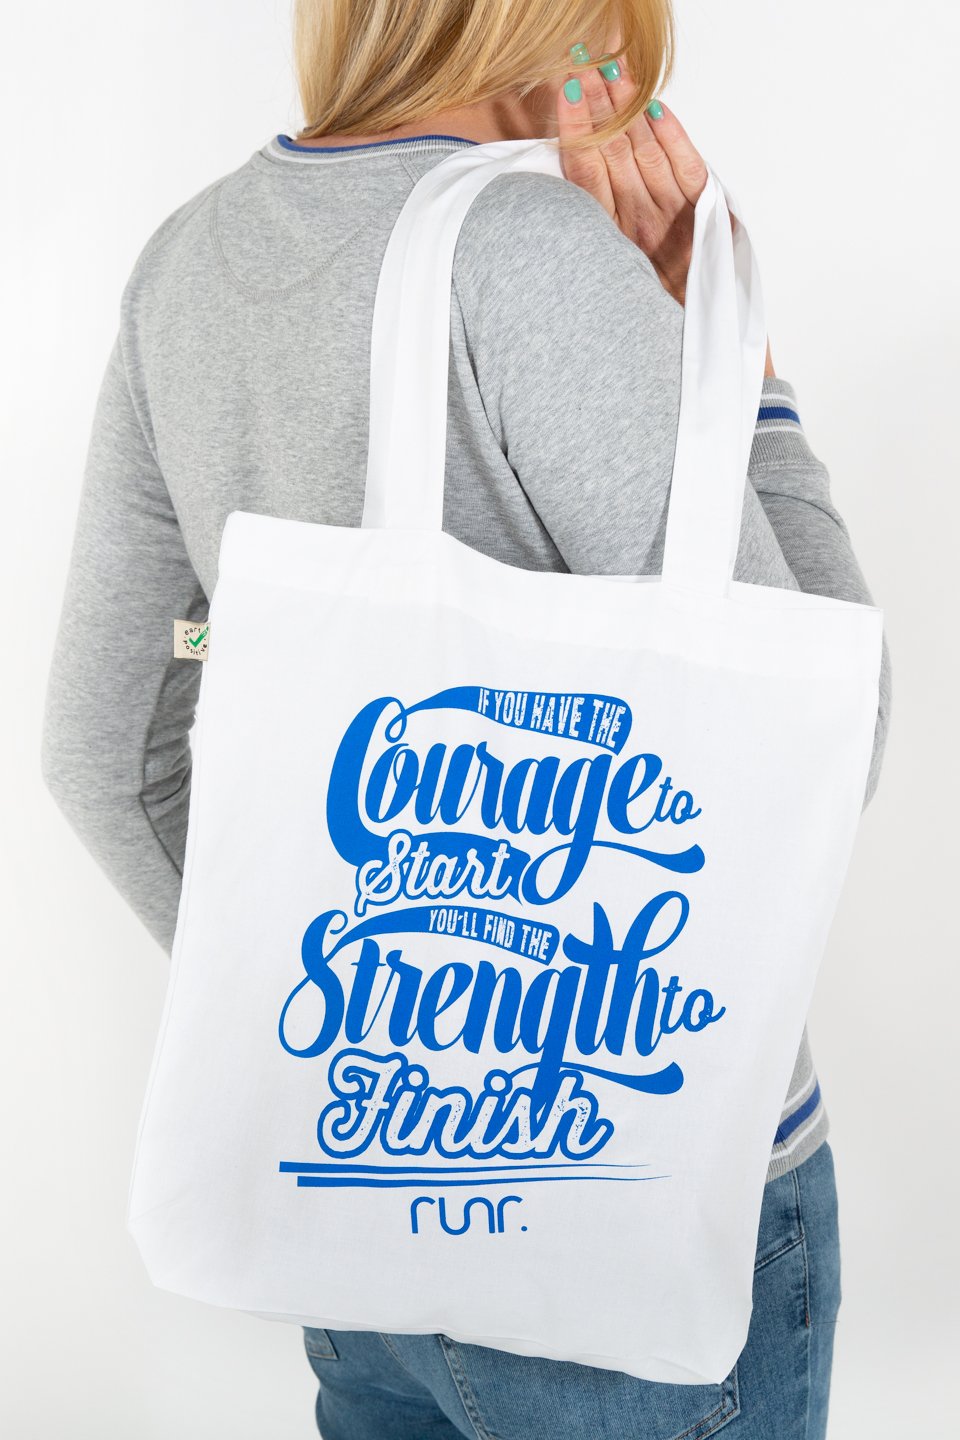 Courage To Start Tote Bag White/Blue